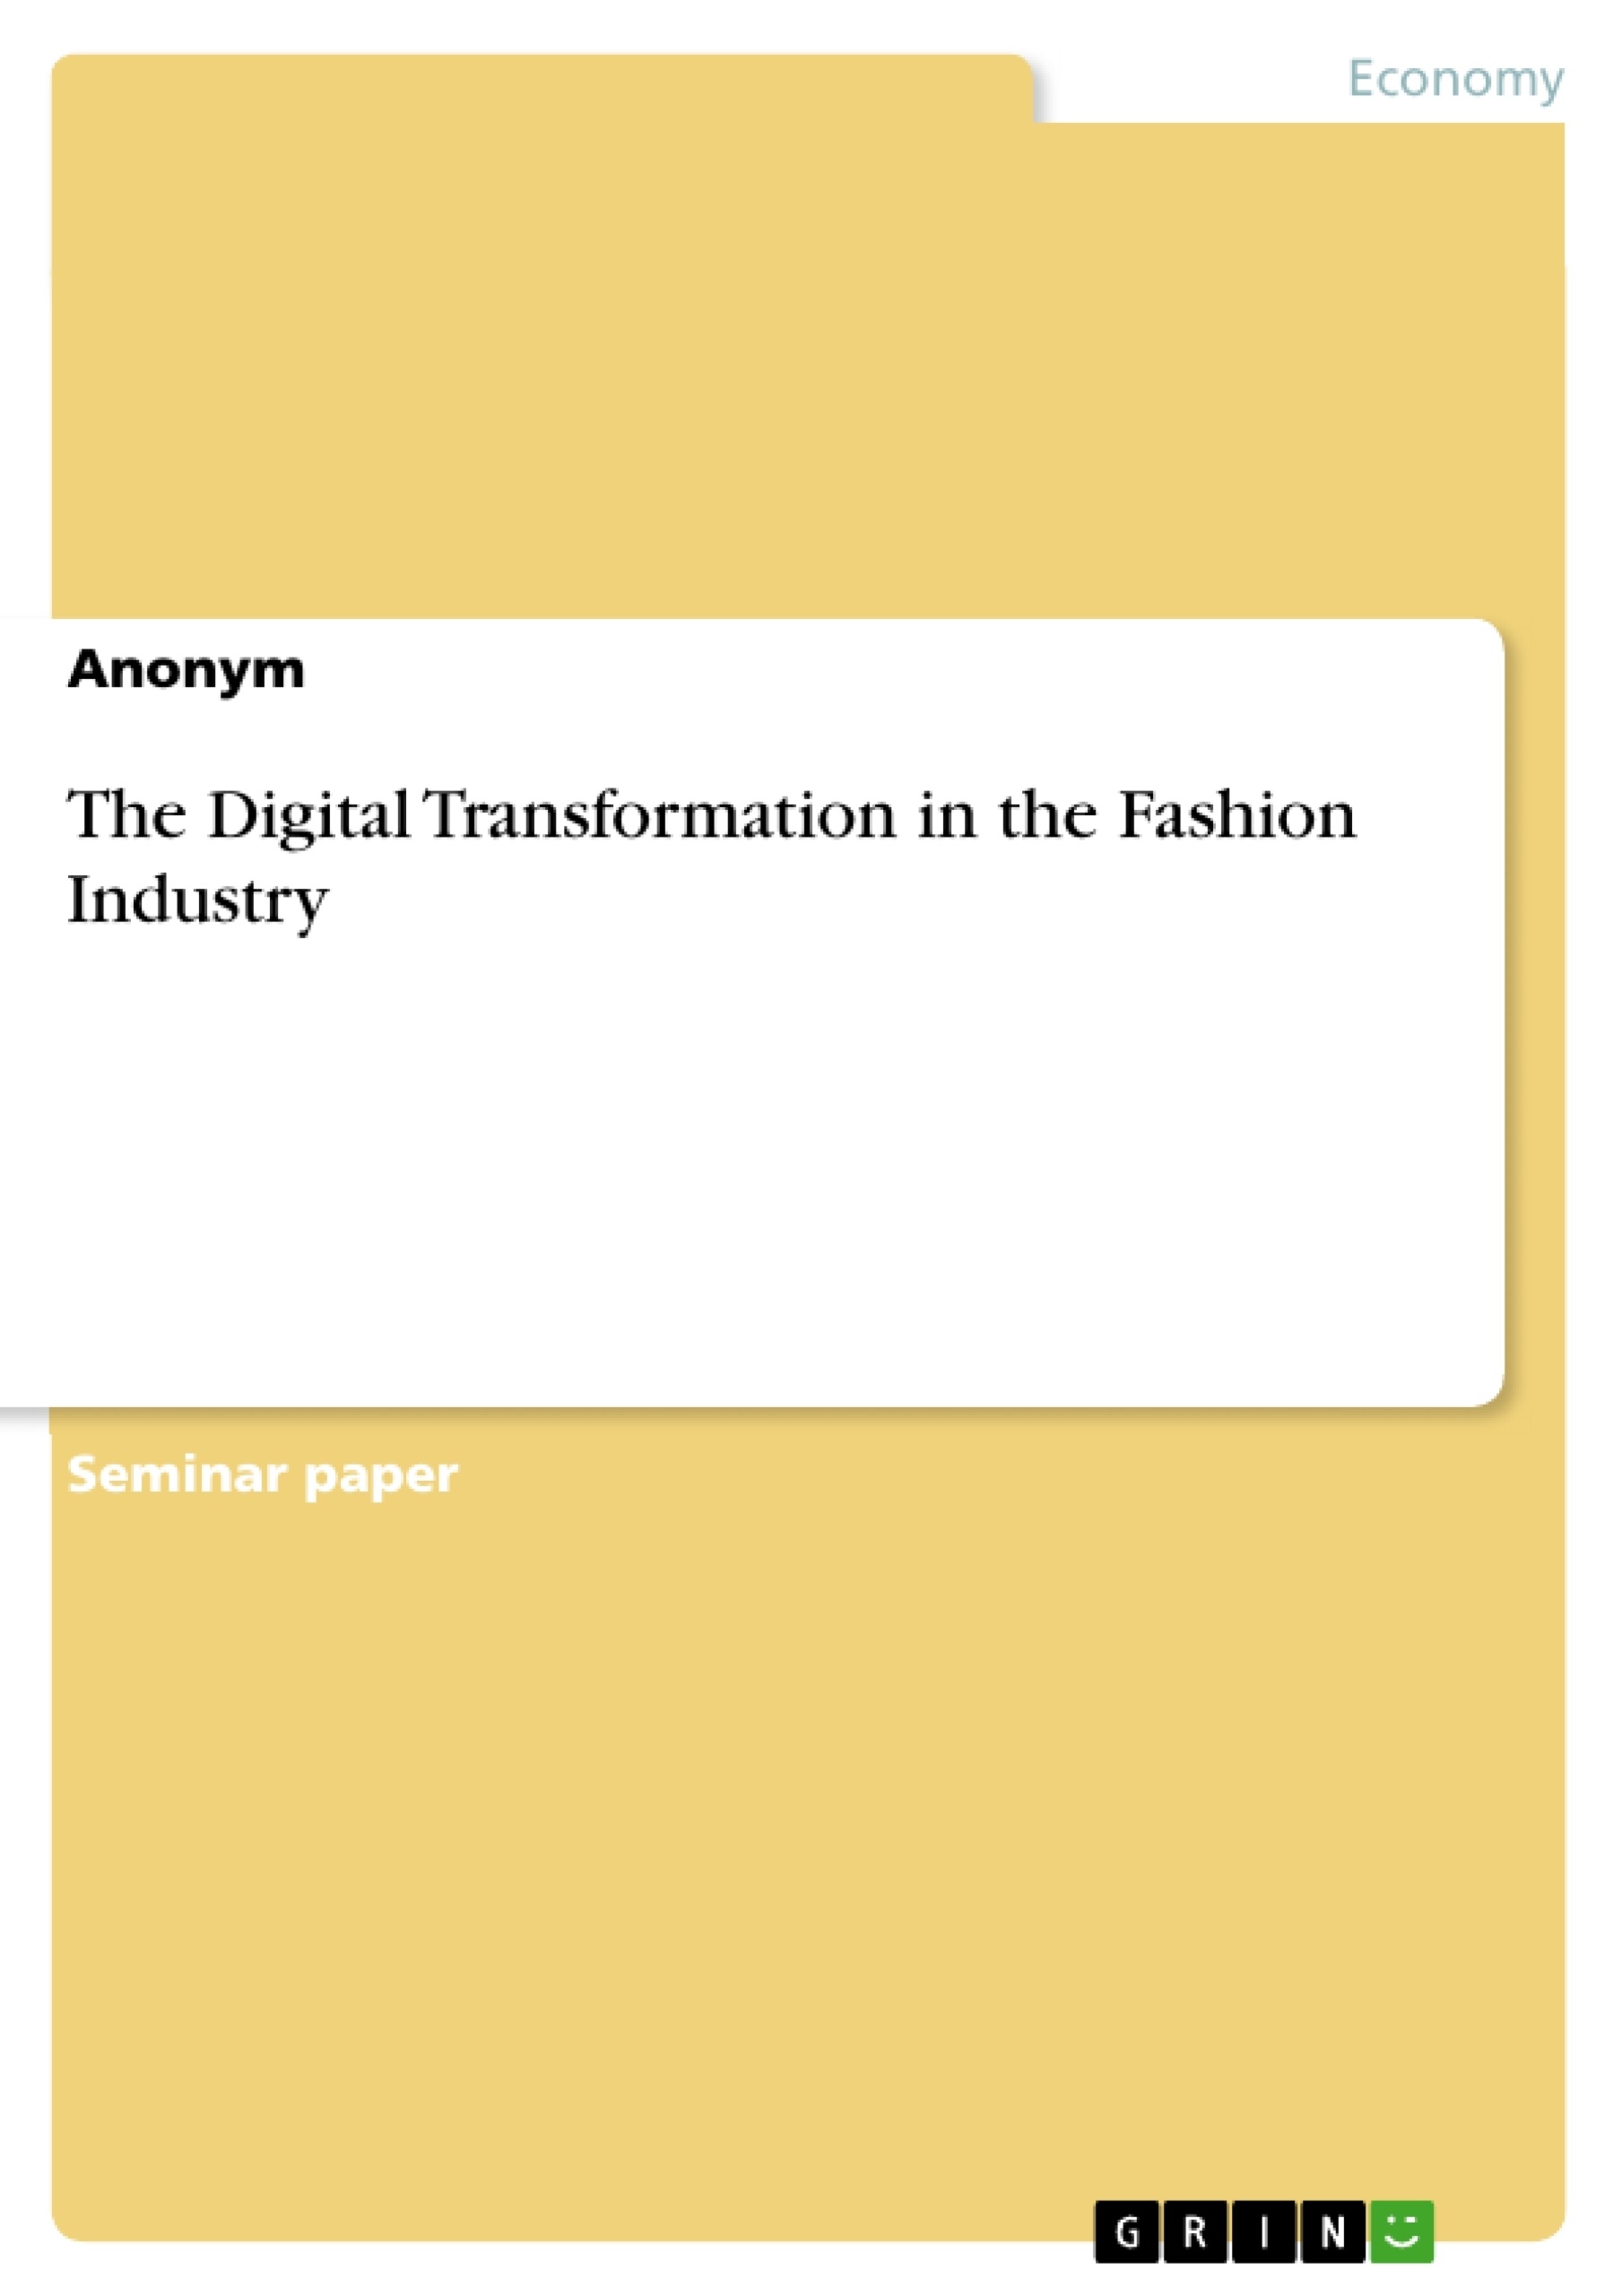 Title: The Digital Transformation in the Fashion Industry